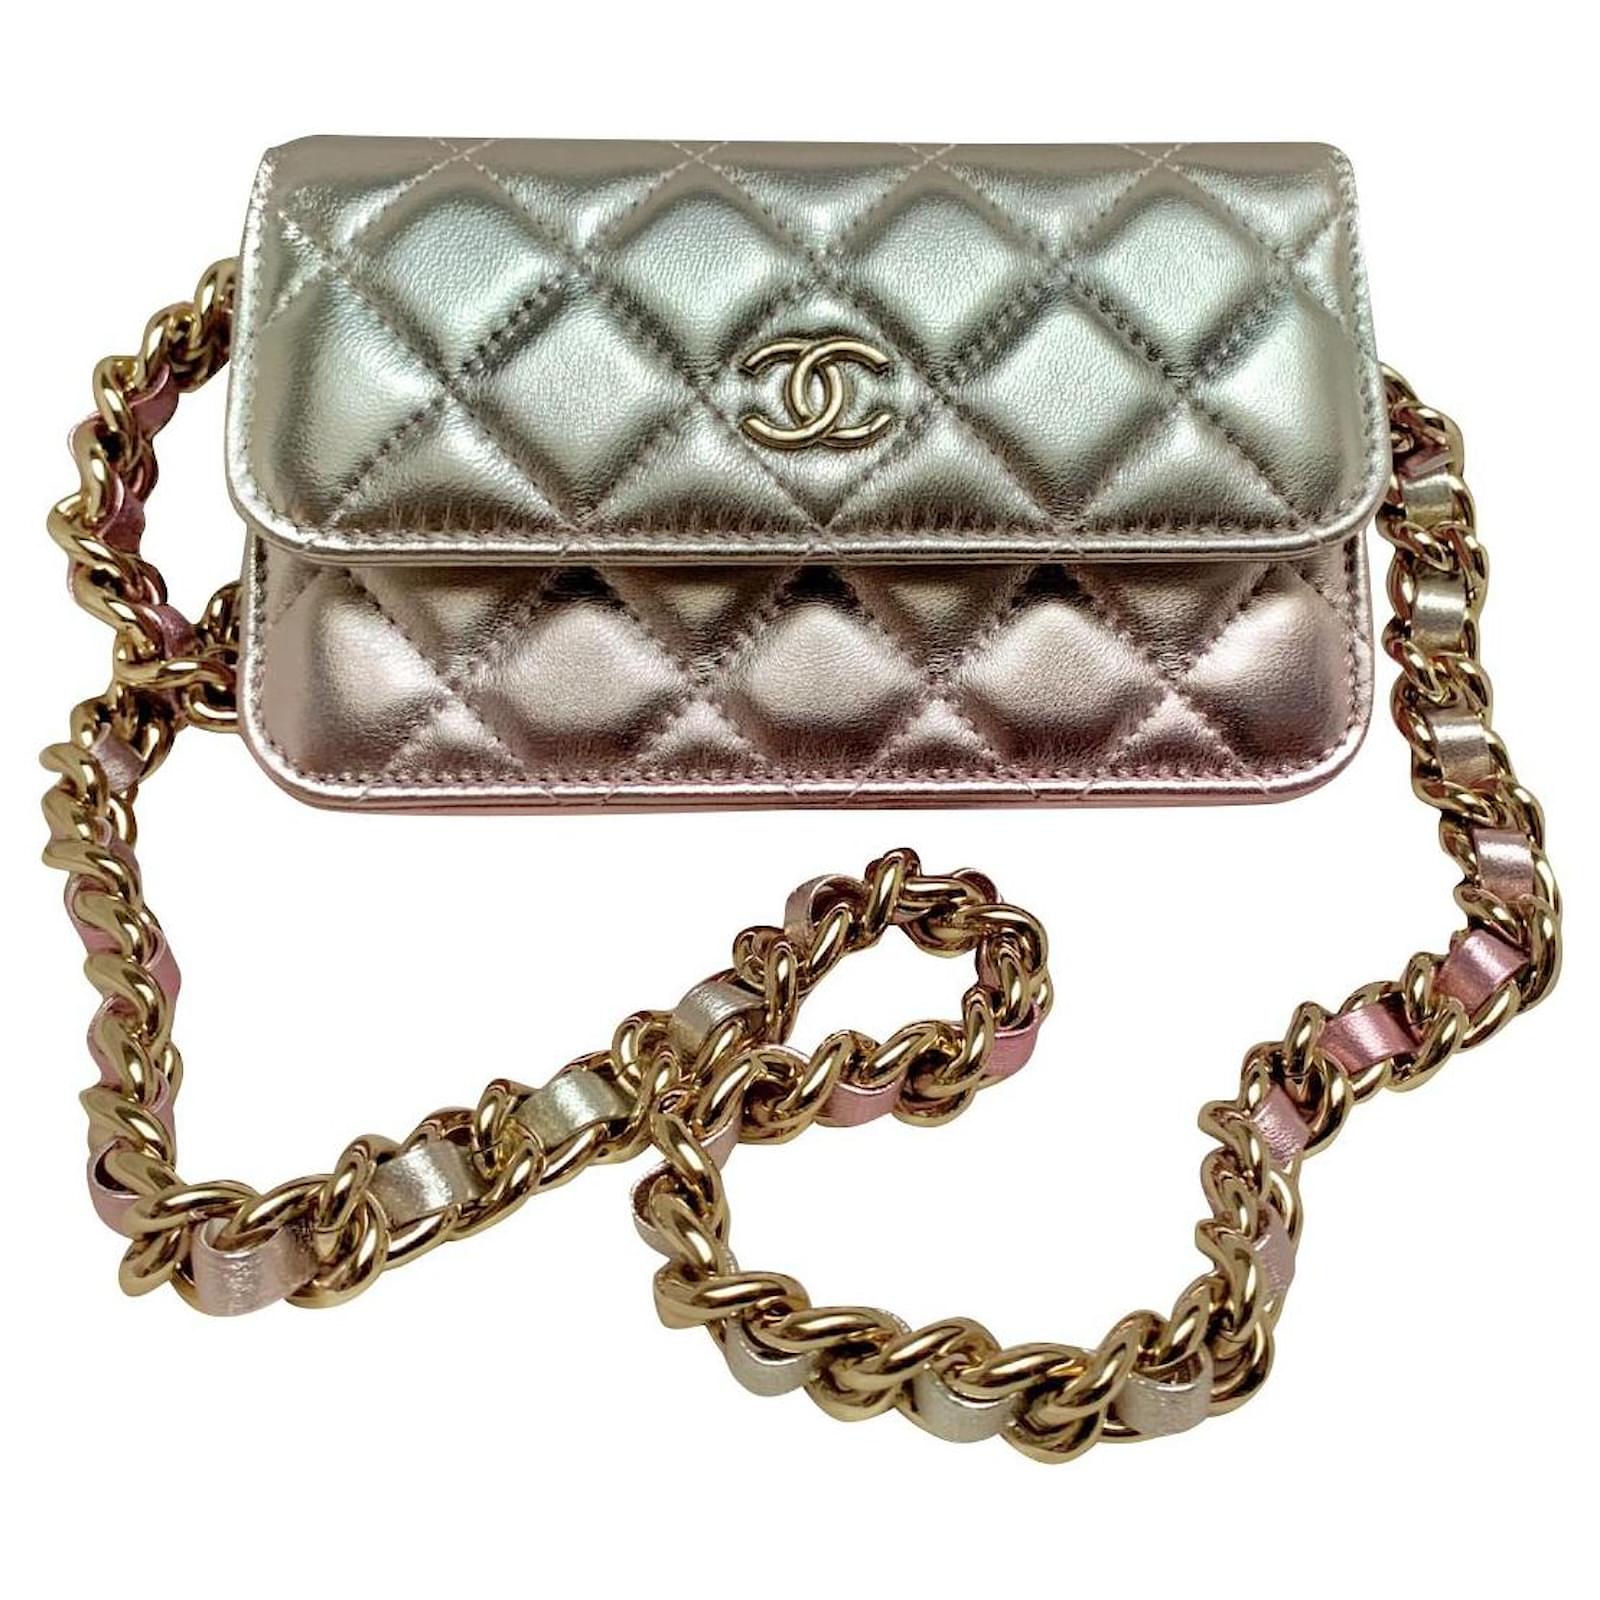 chanel vintage wallet on chain pink